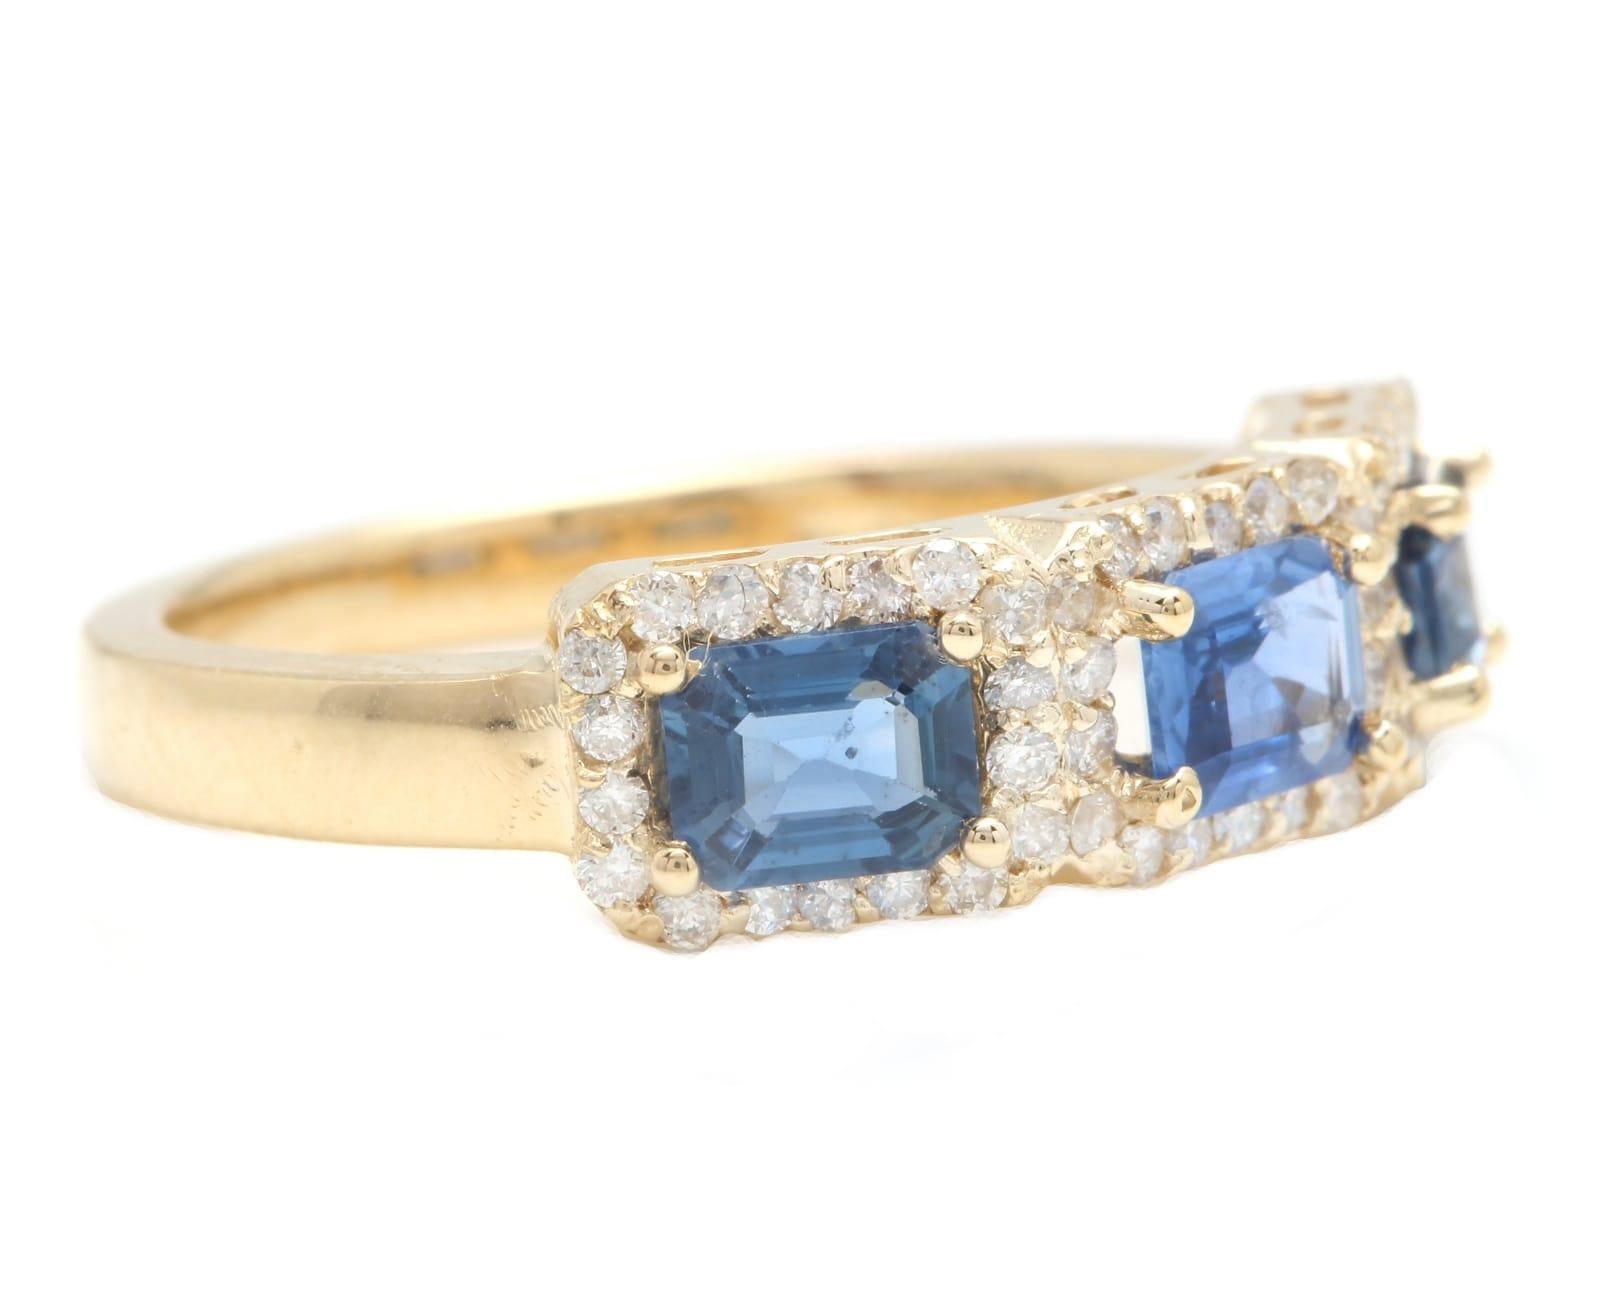 1.70 Carats Exquisite Natural Blue Sapphire 14K Solid Yellow Gold Ring

Suggested Replacement Value $4,000.00

Total Natural Blue Sapphires Weight: Approx. 1.30 Carats 

Diamond Weight is Approx. 0.40Ct (Color G-H / Clarity SI1-SI2)

Sapphire